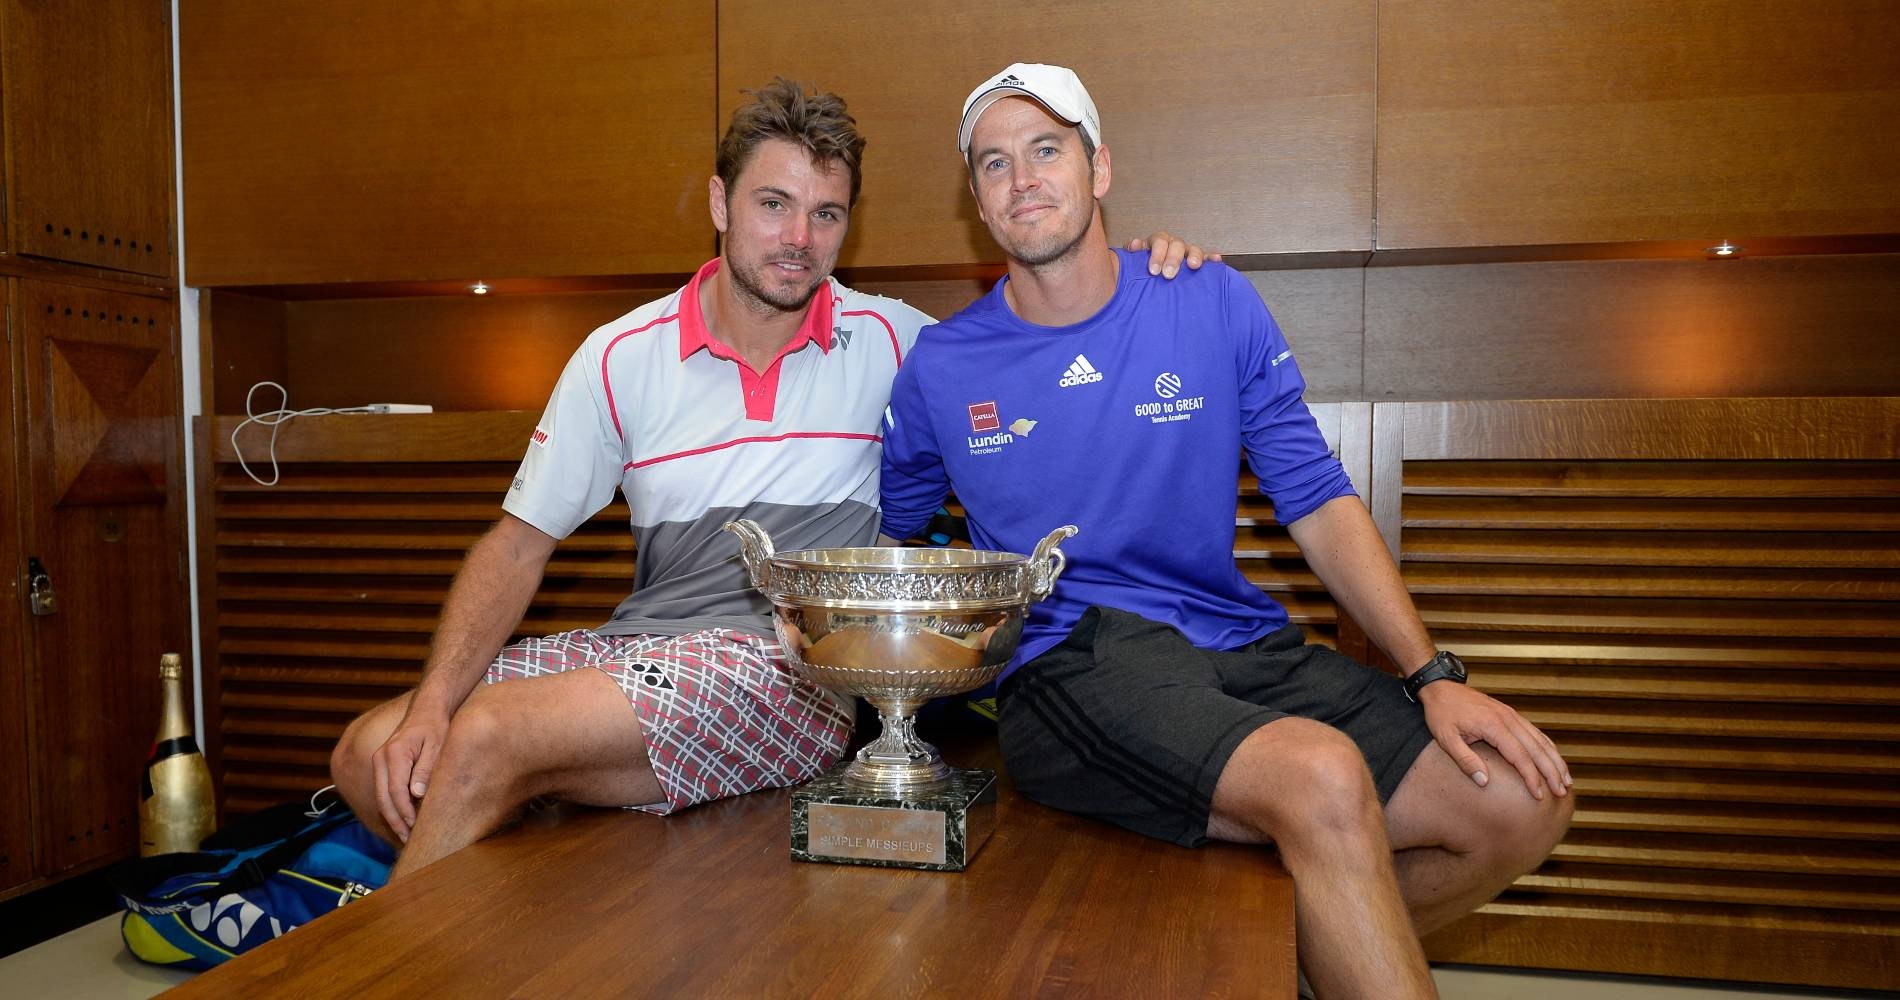 Tennis: All you need to know about Stan Wawrinka